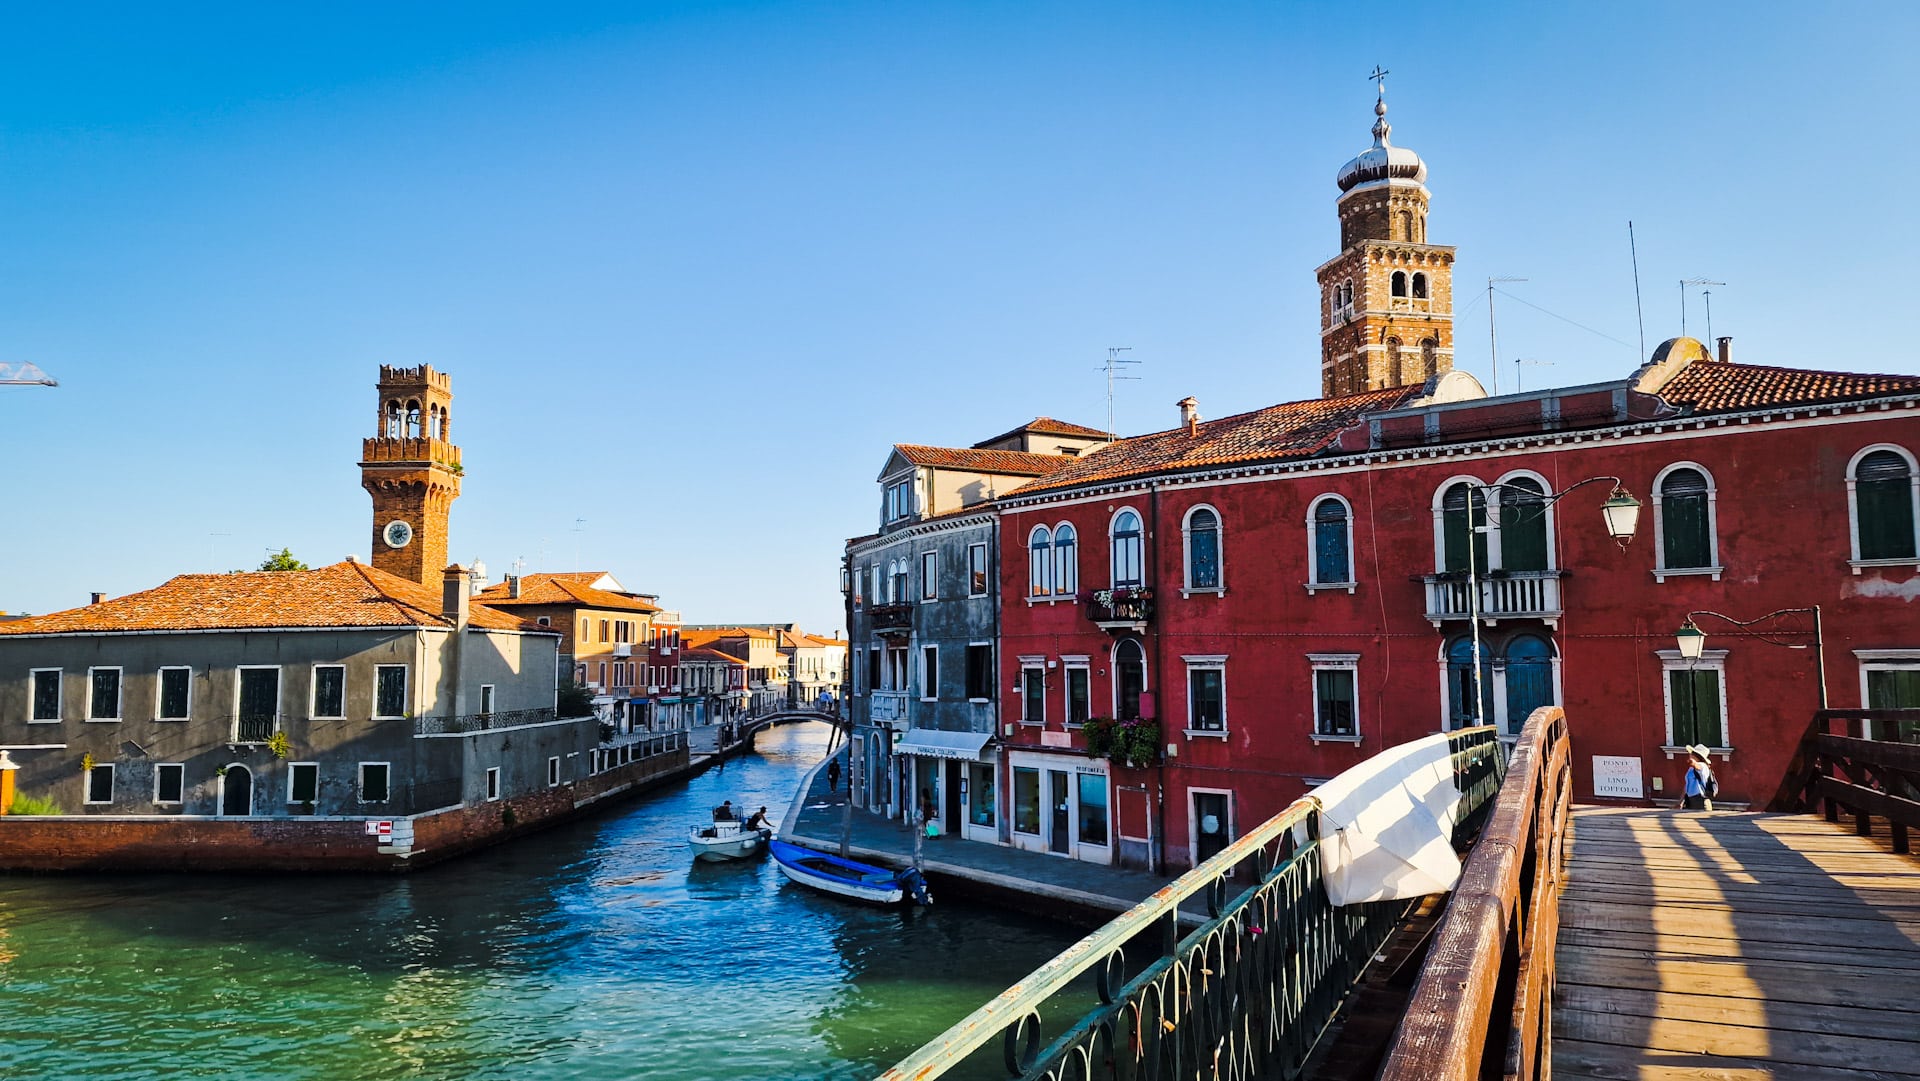 Murano Island offers a quiet, romantic alternative to the central Venetian districts